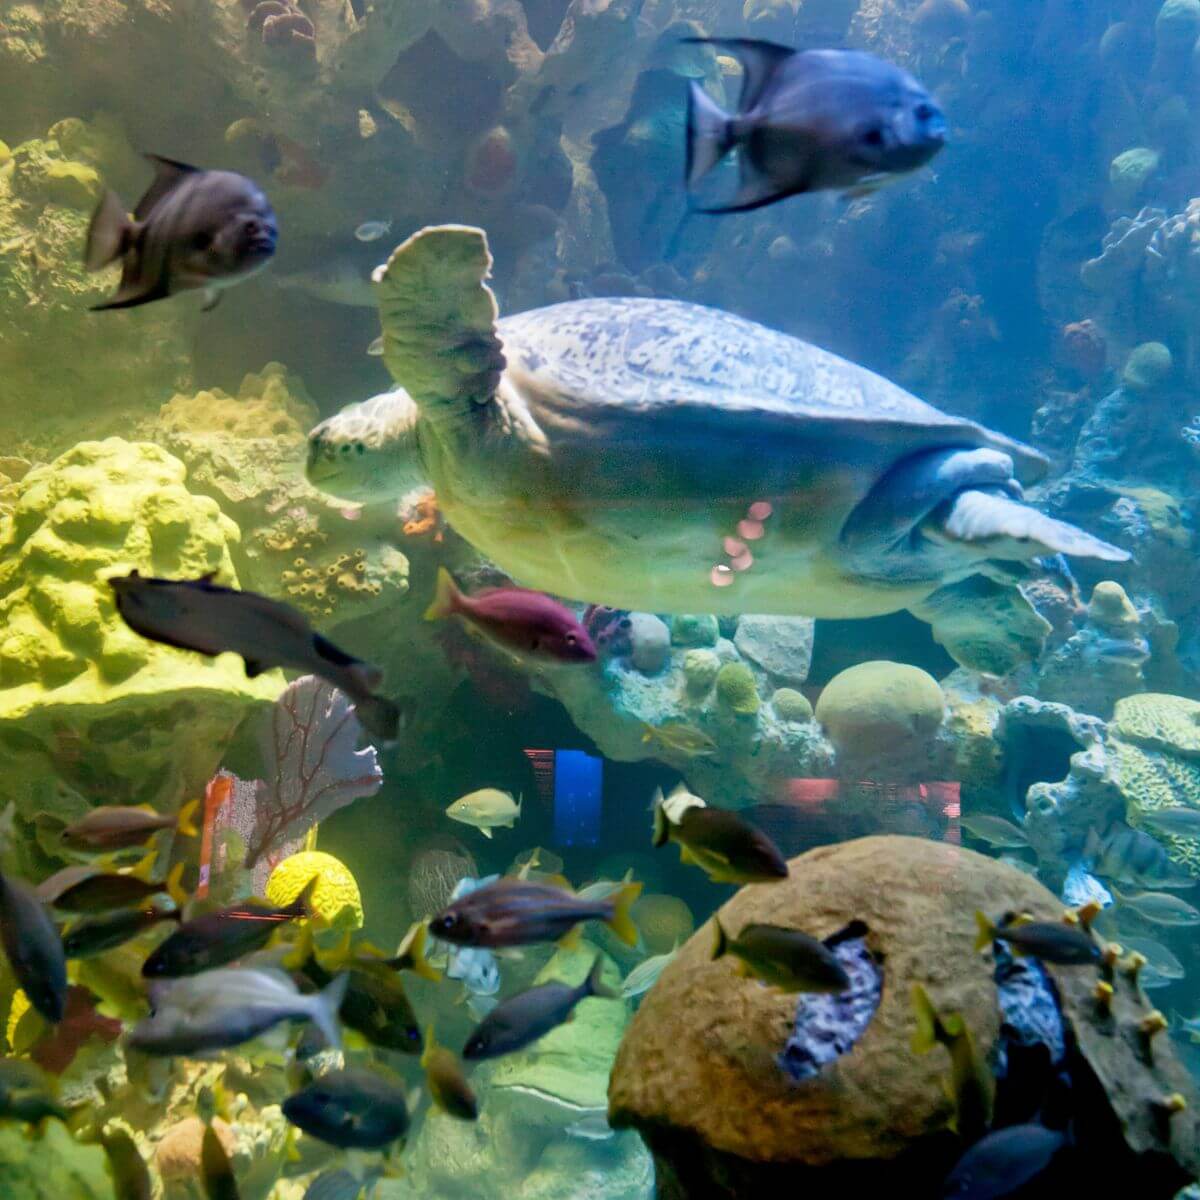 Photo of Myrtle the green sea turtle swimming amongst lots of fish at the New England Aquarium in Boston.